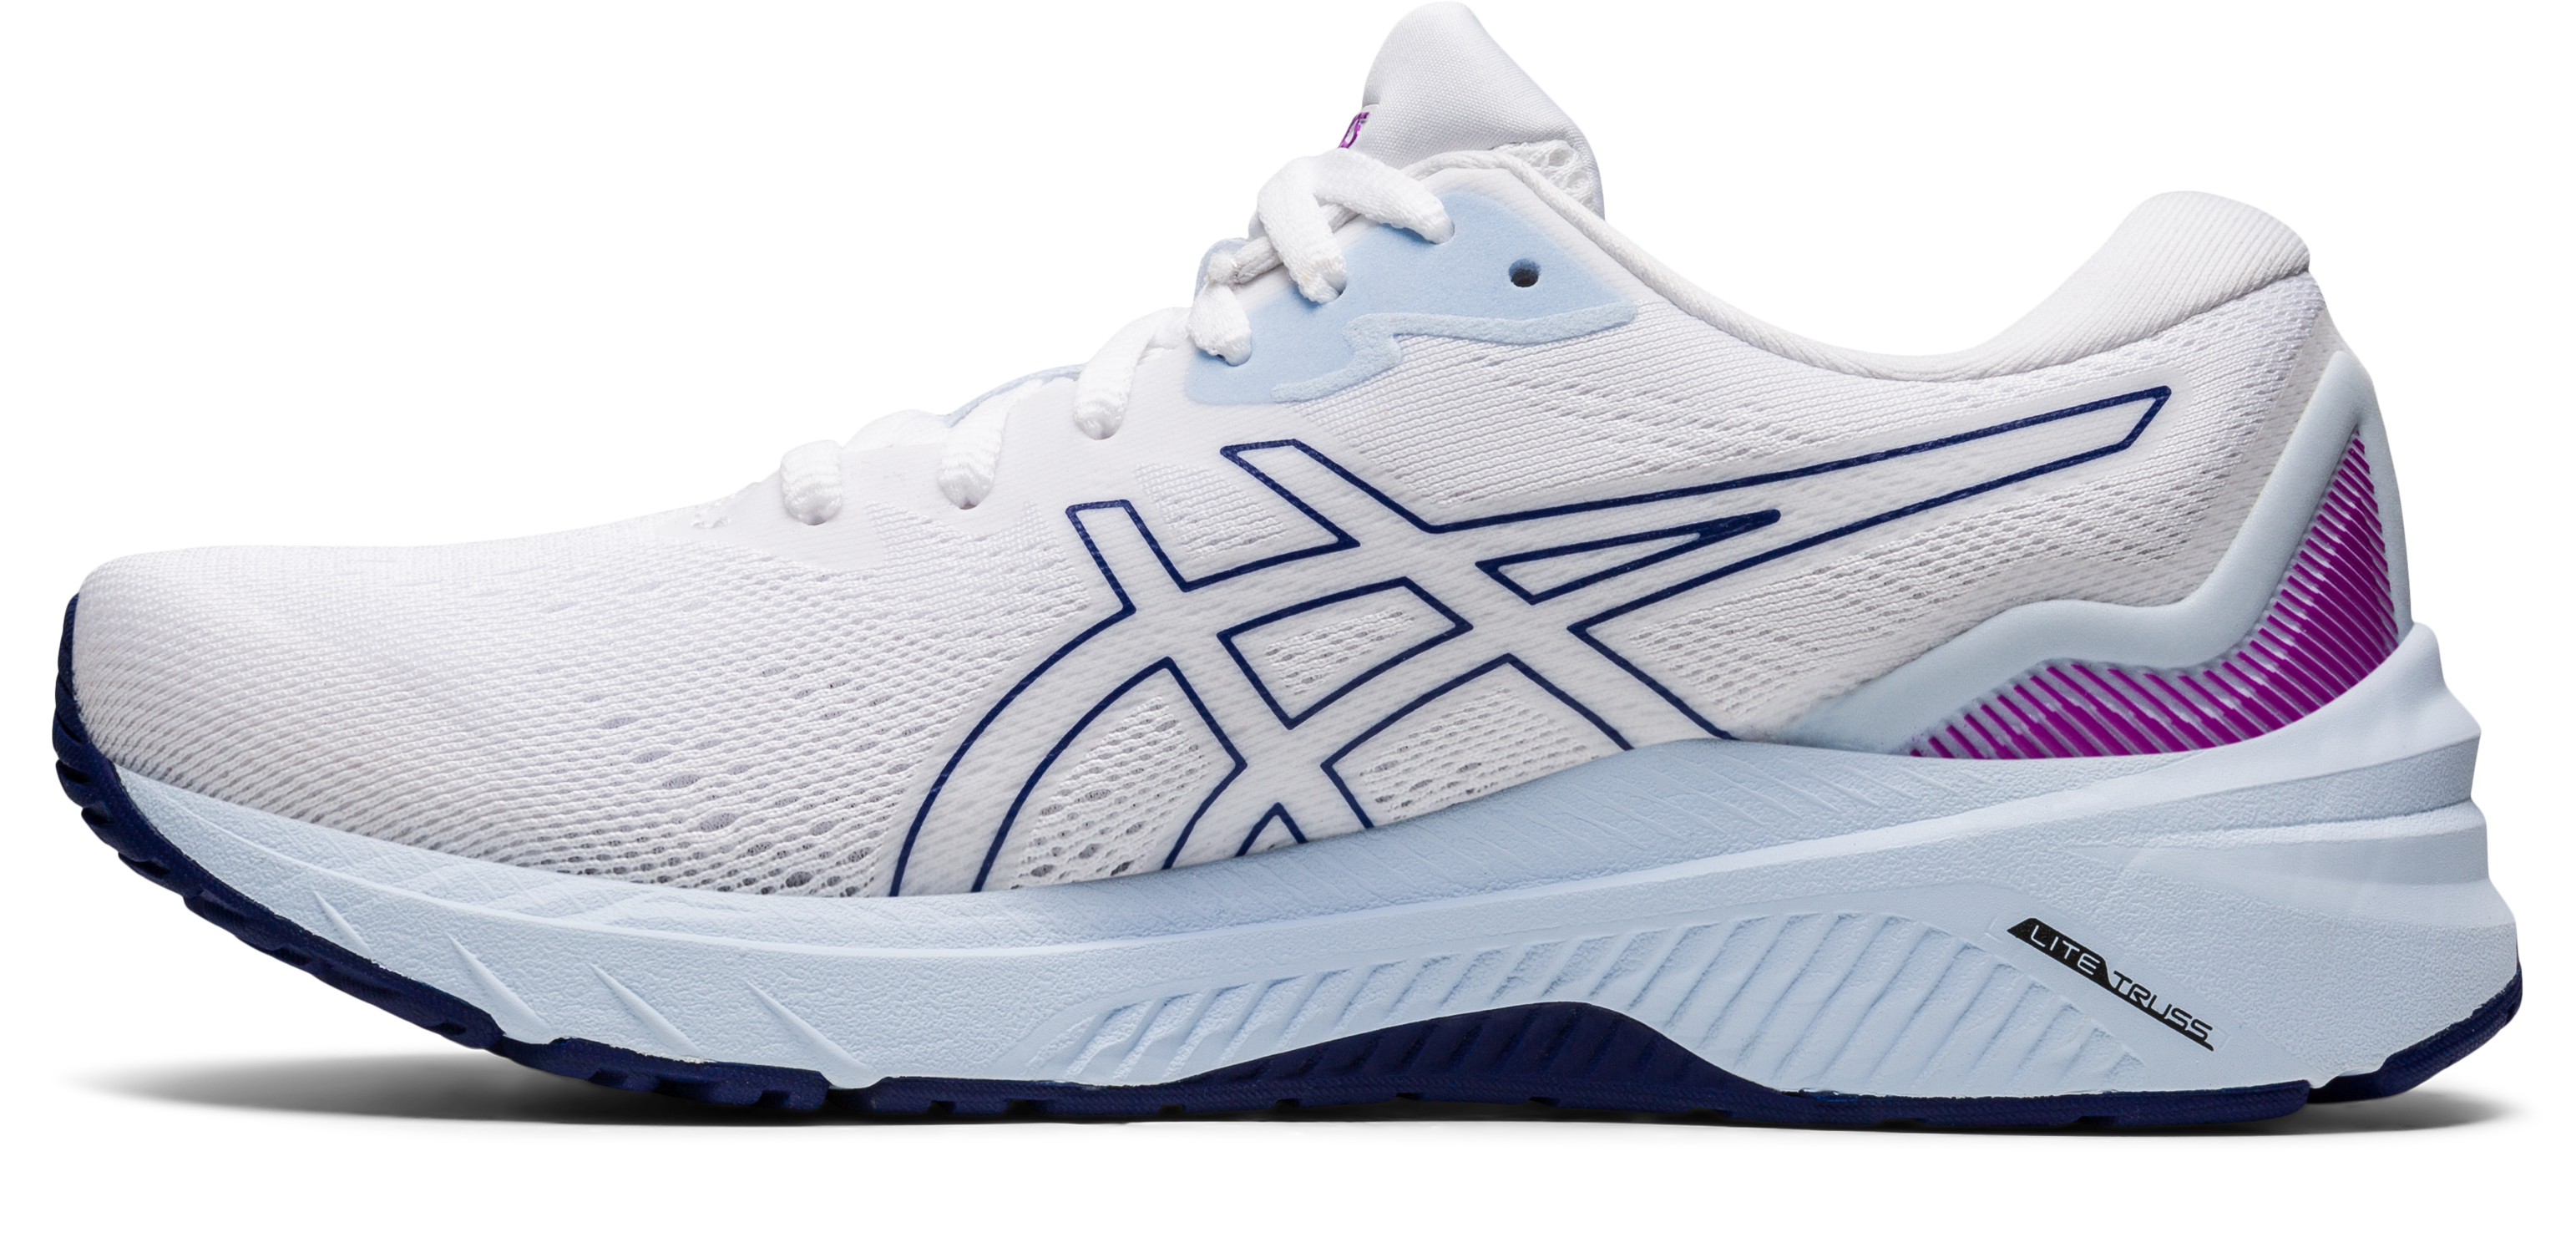 Asics Women's GT-1000 11 Running Shoes in White/Dive Blue